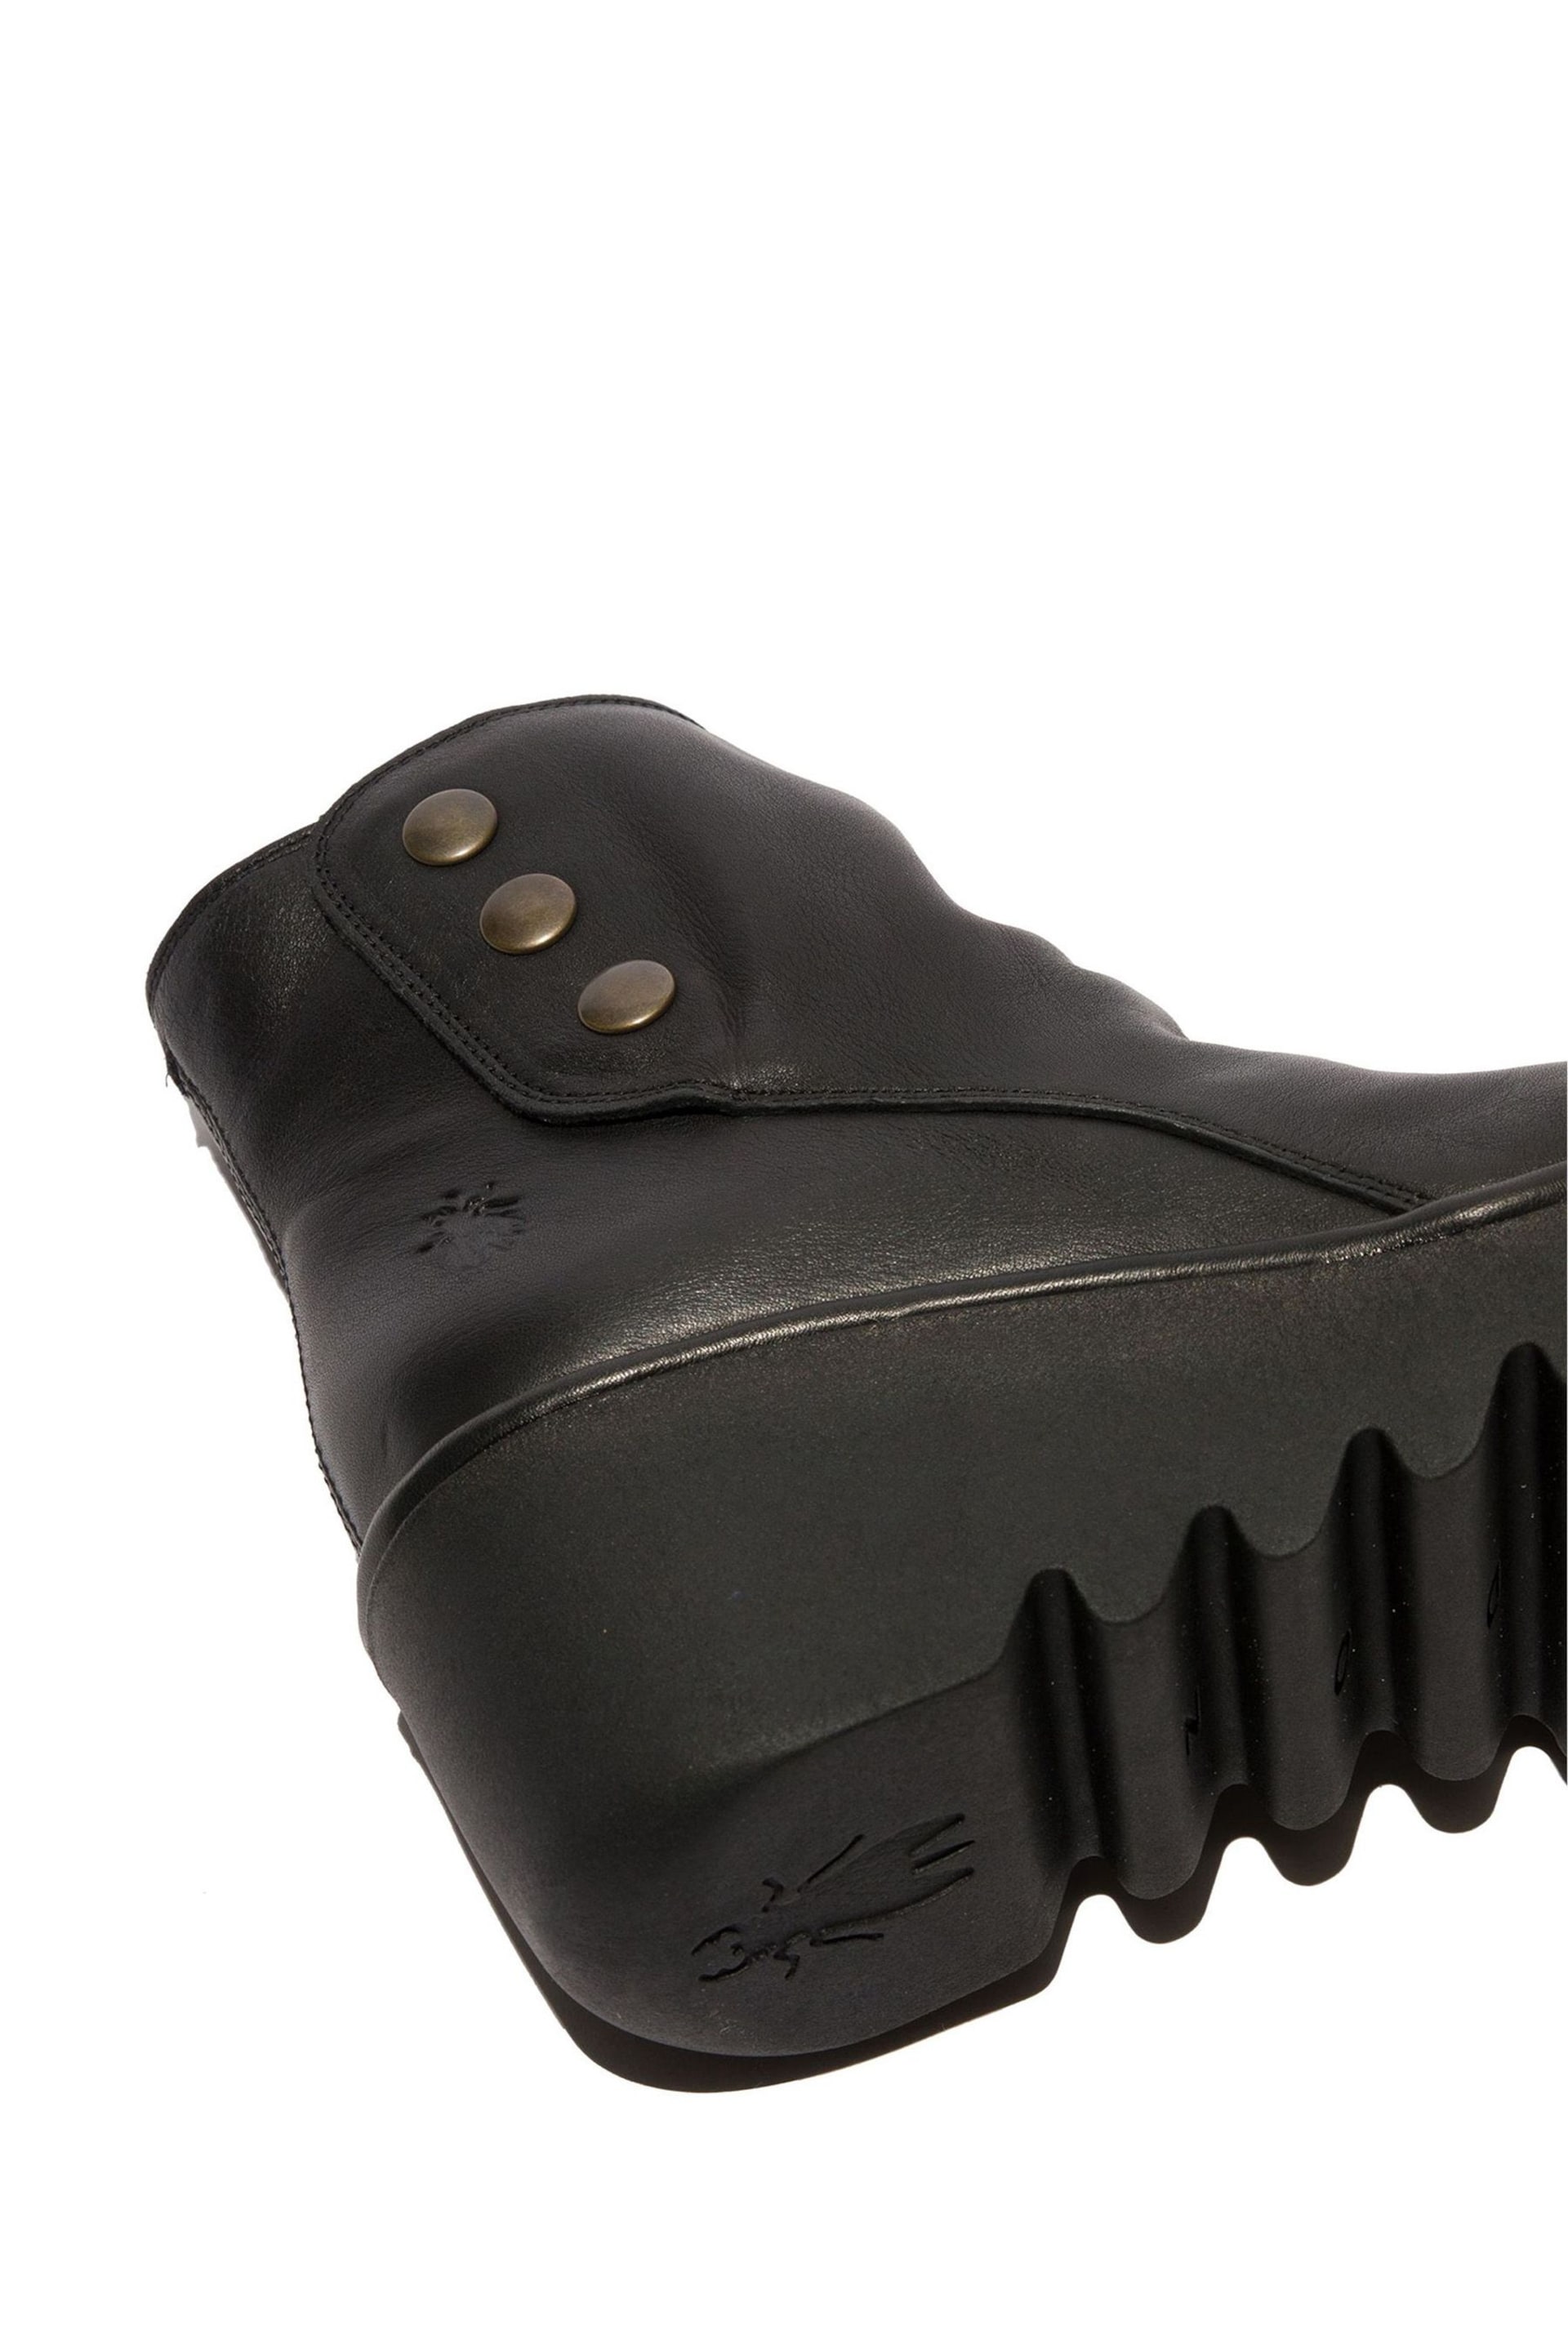 Fly London Brom Black Wedge Boots - Image 4 of 4